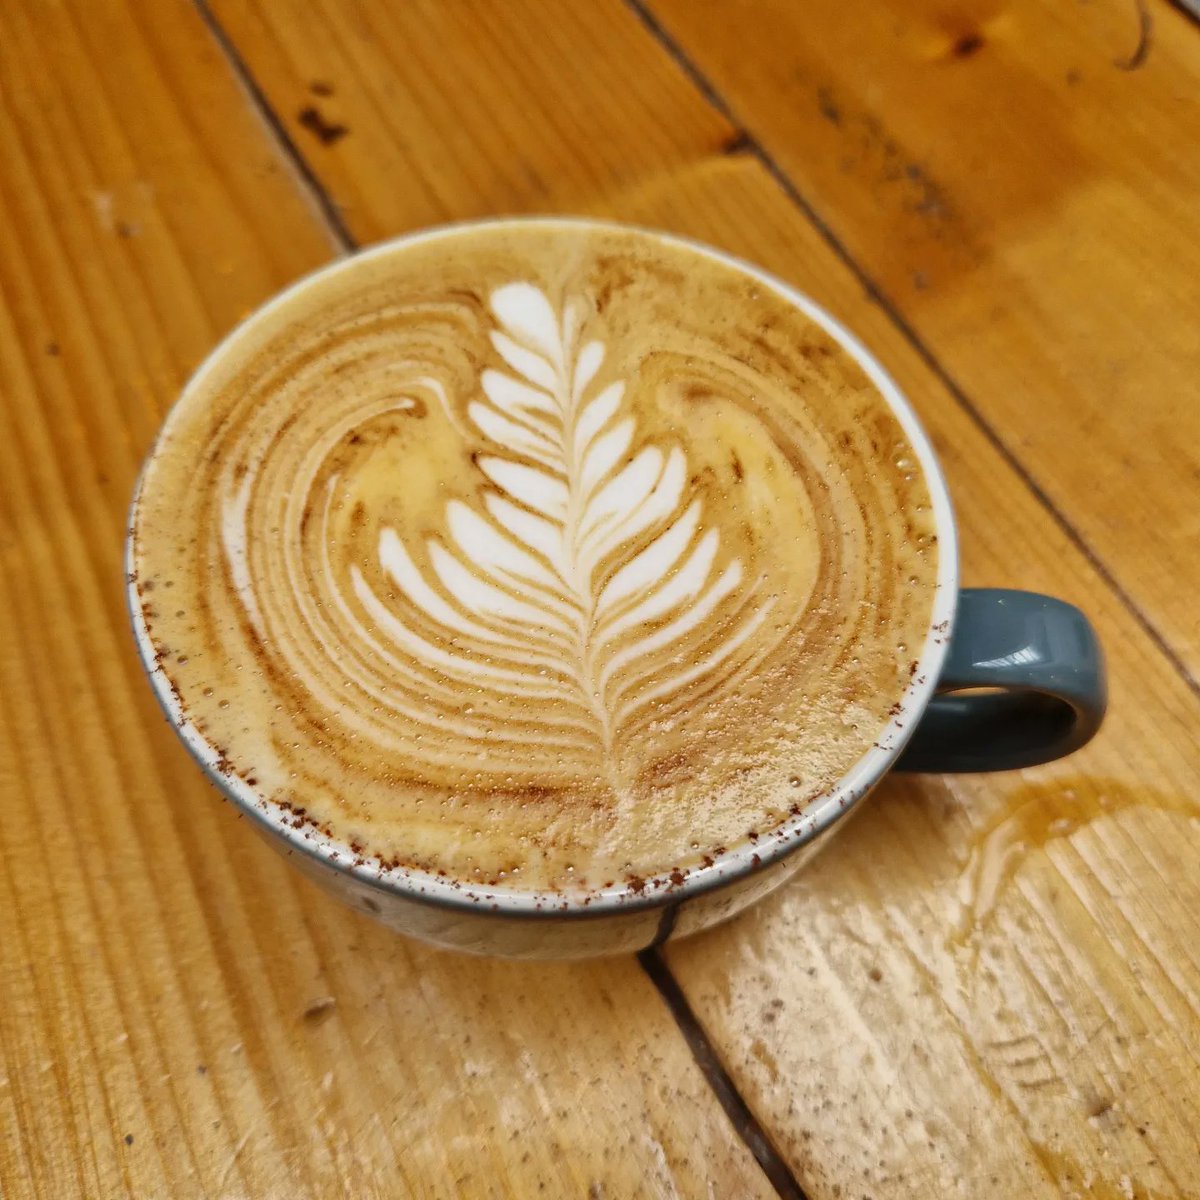 Barista class trip today to @theroastingproject in Burntisland for a lesson on everything coffee. We learned about coffee cherries, different beans, saw & smelled the roasting process, made our own coffee, & watched Claire create some beautiful latte art. @BalwearieHigh #barista